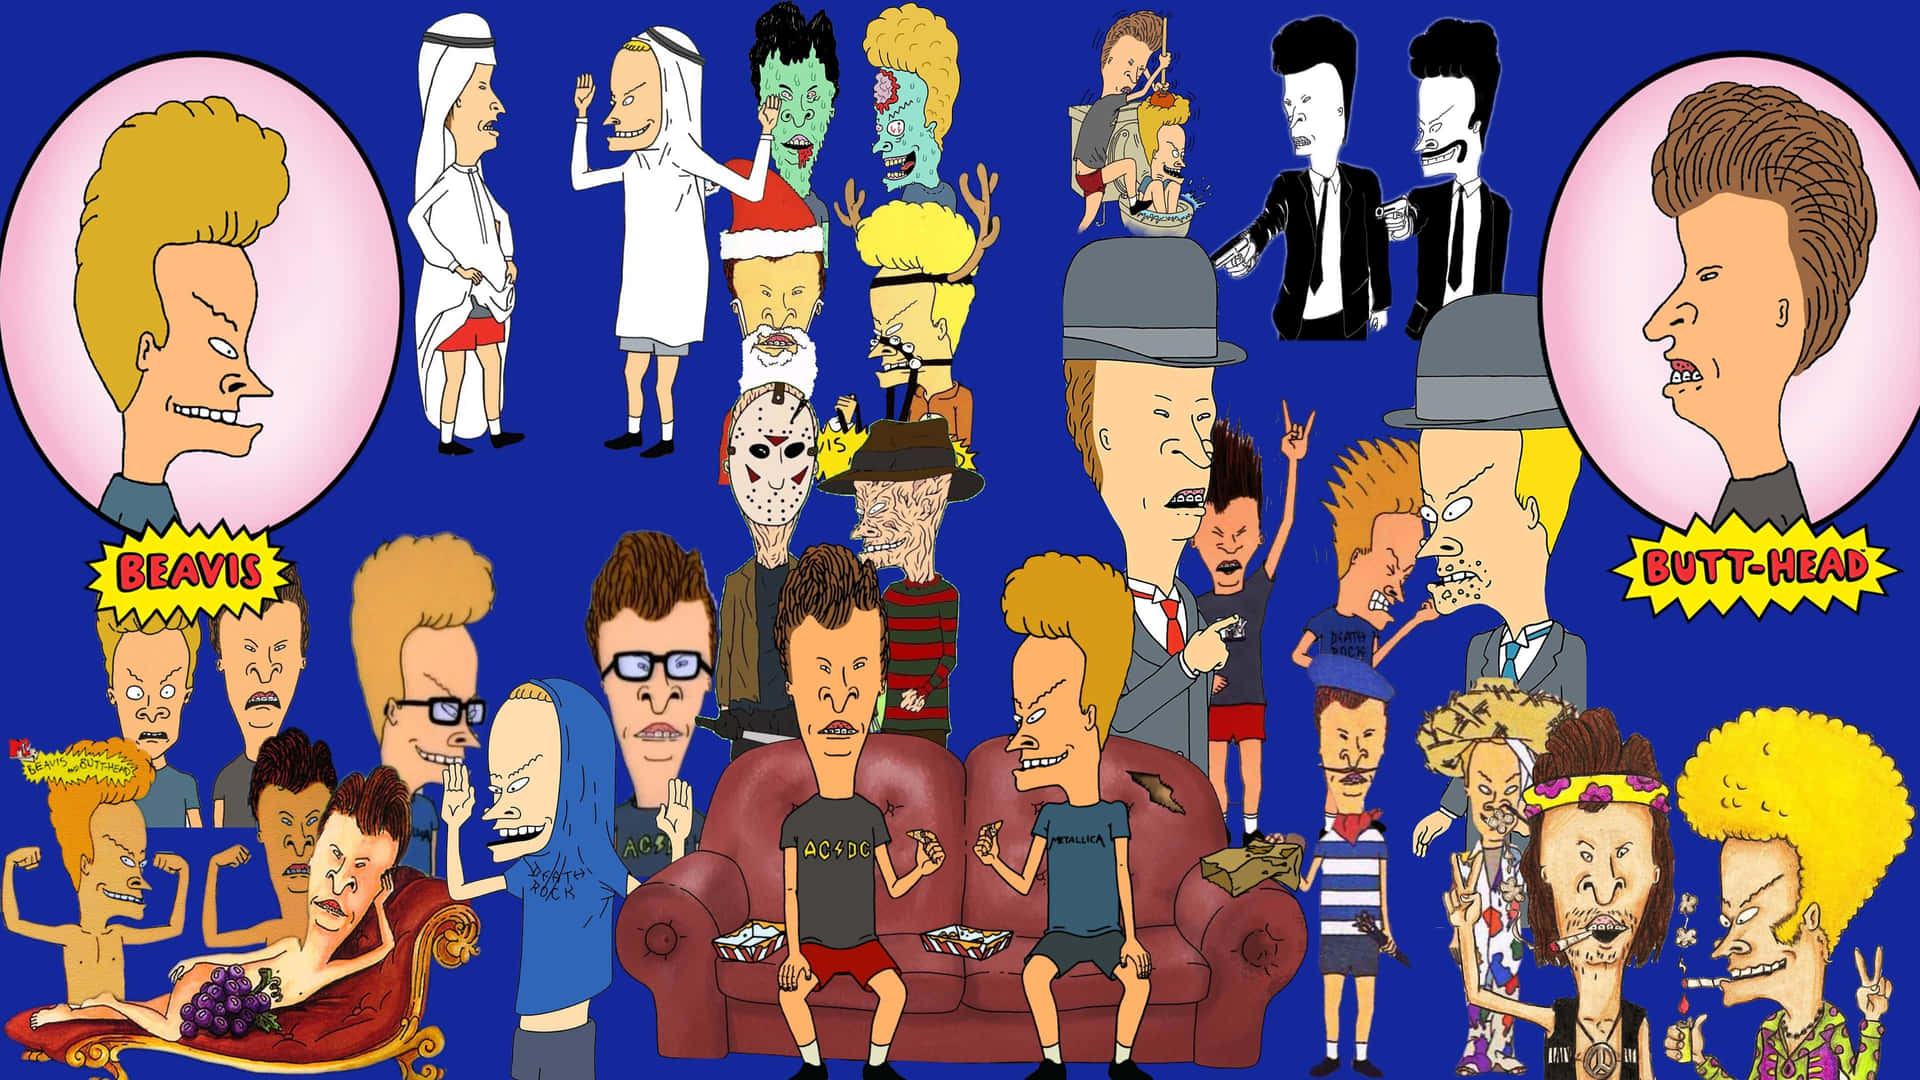 A Cartoon Of The Characters From The Show